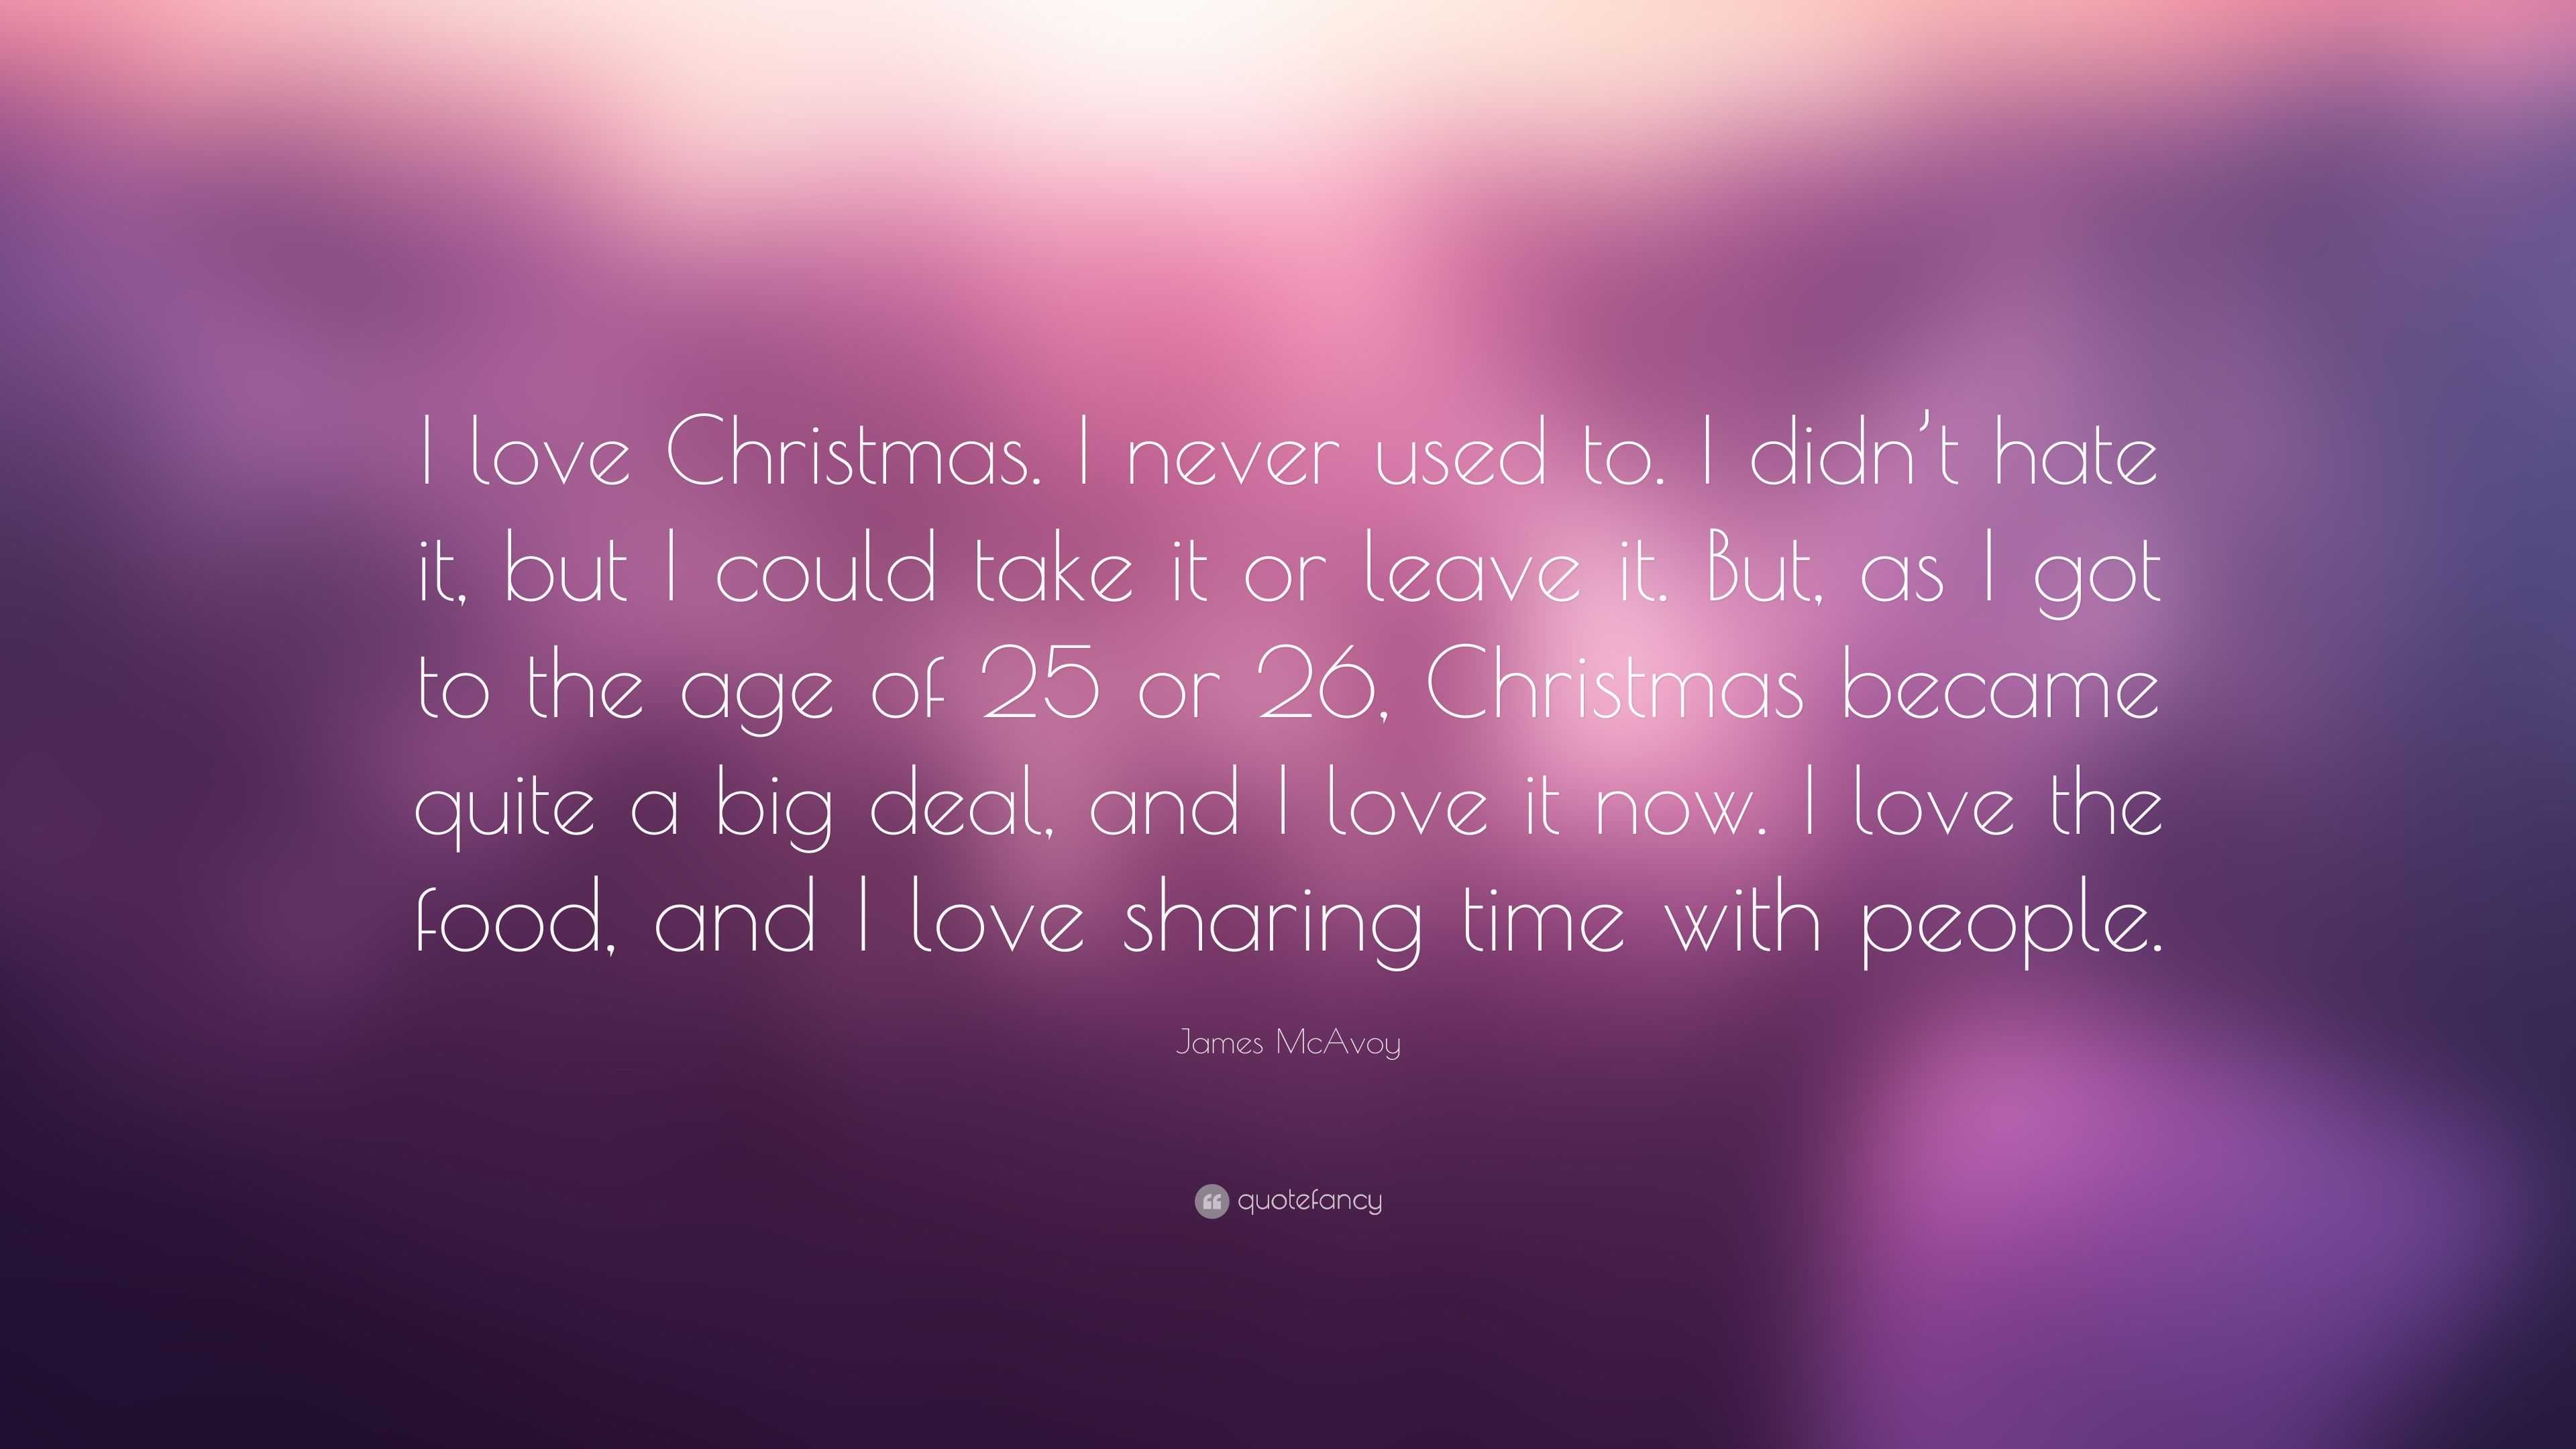 James McAvoy Quote “I love Christmas I never used to I didn